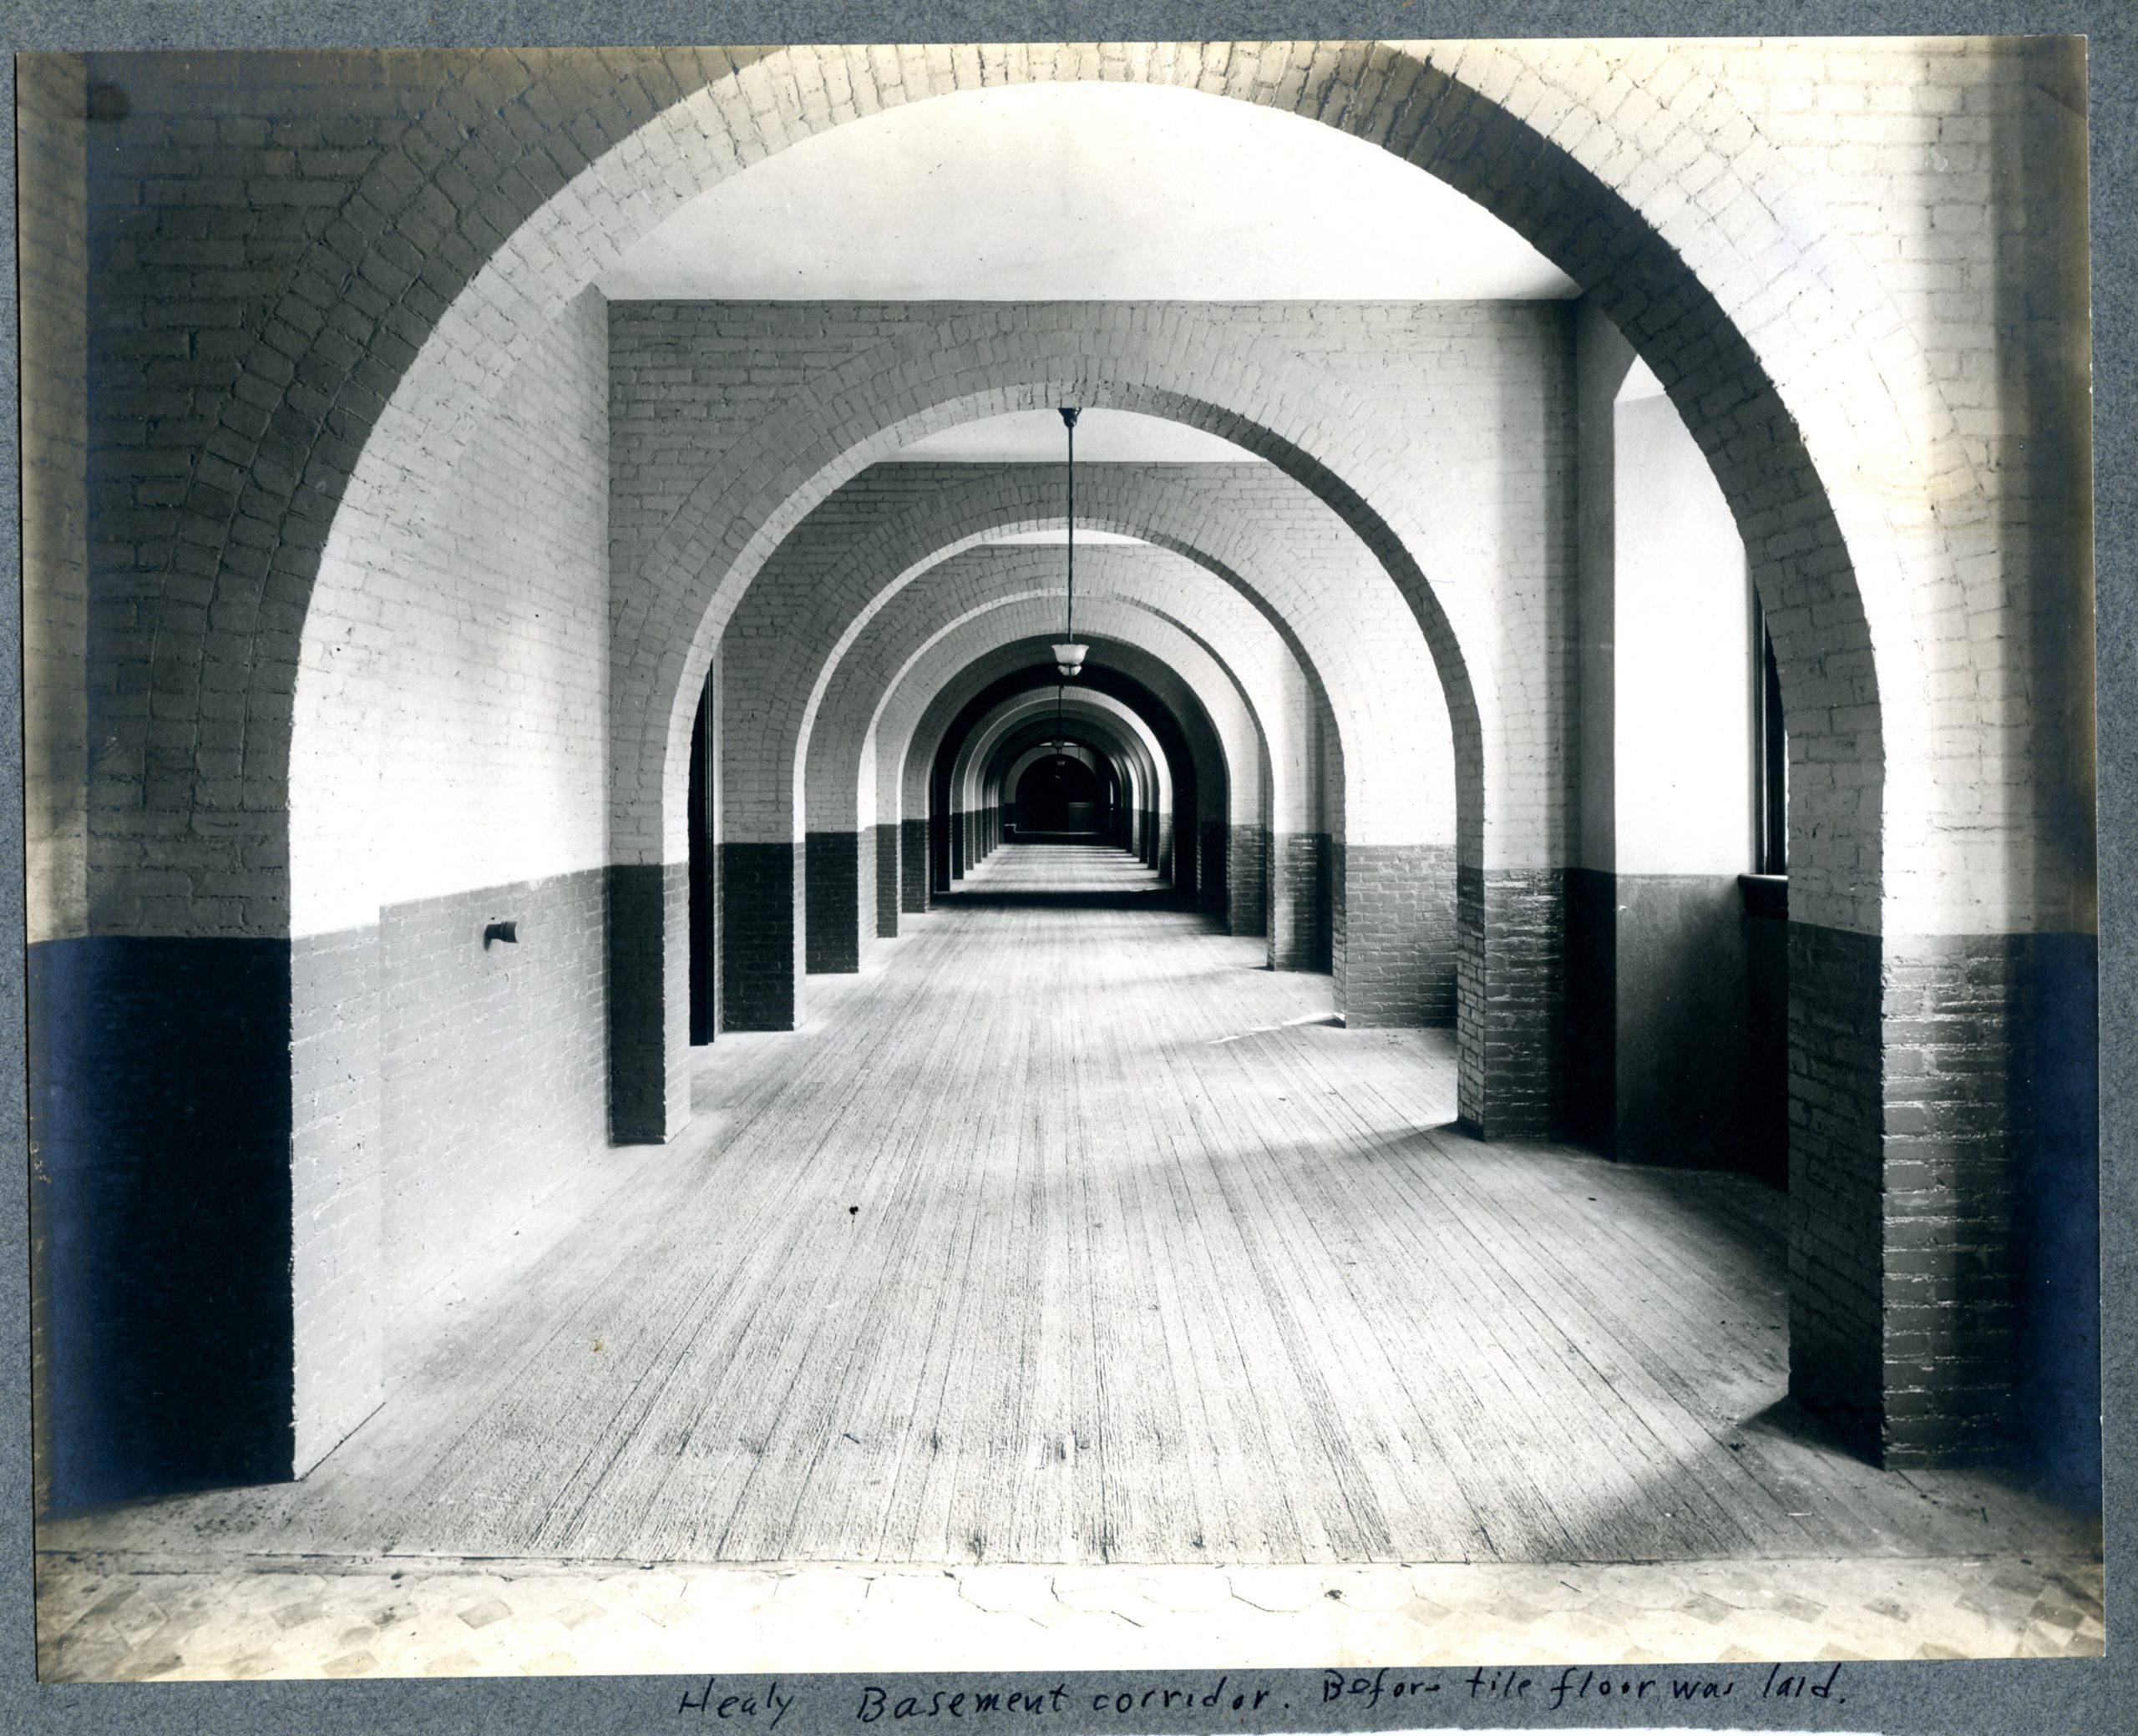 An undated image of Healy Hall basement showing a long corridor with repeating archways.